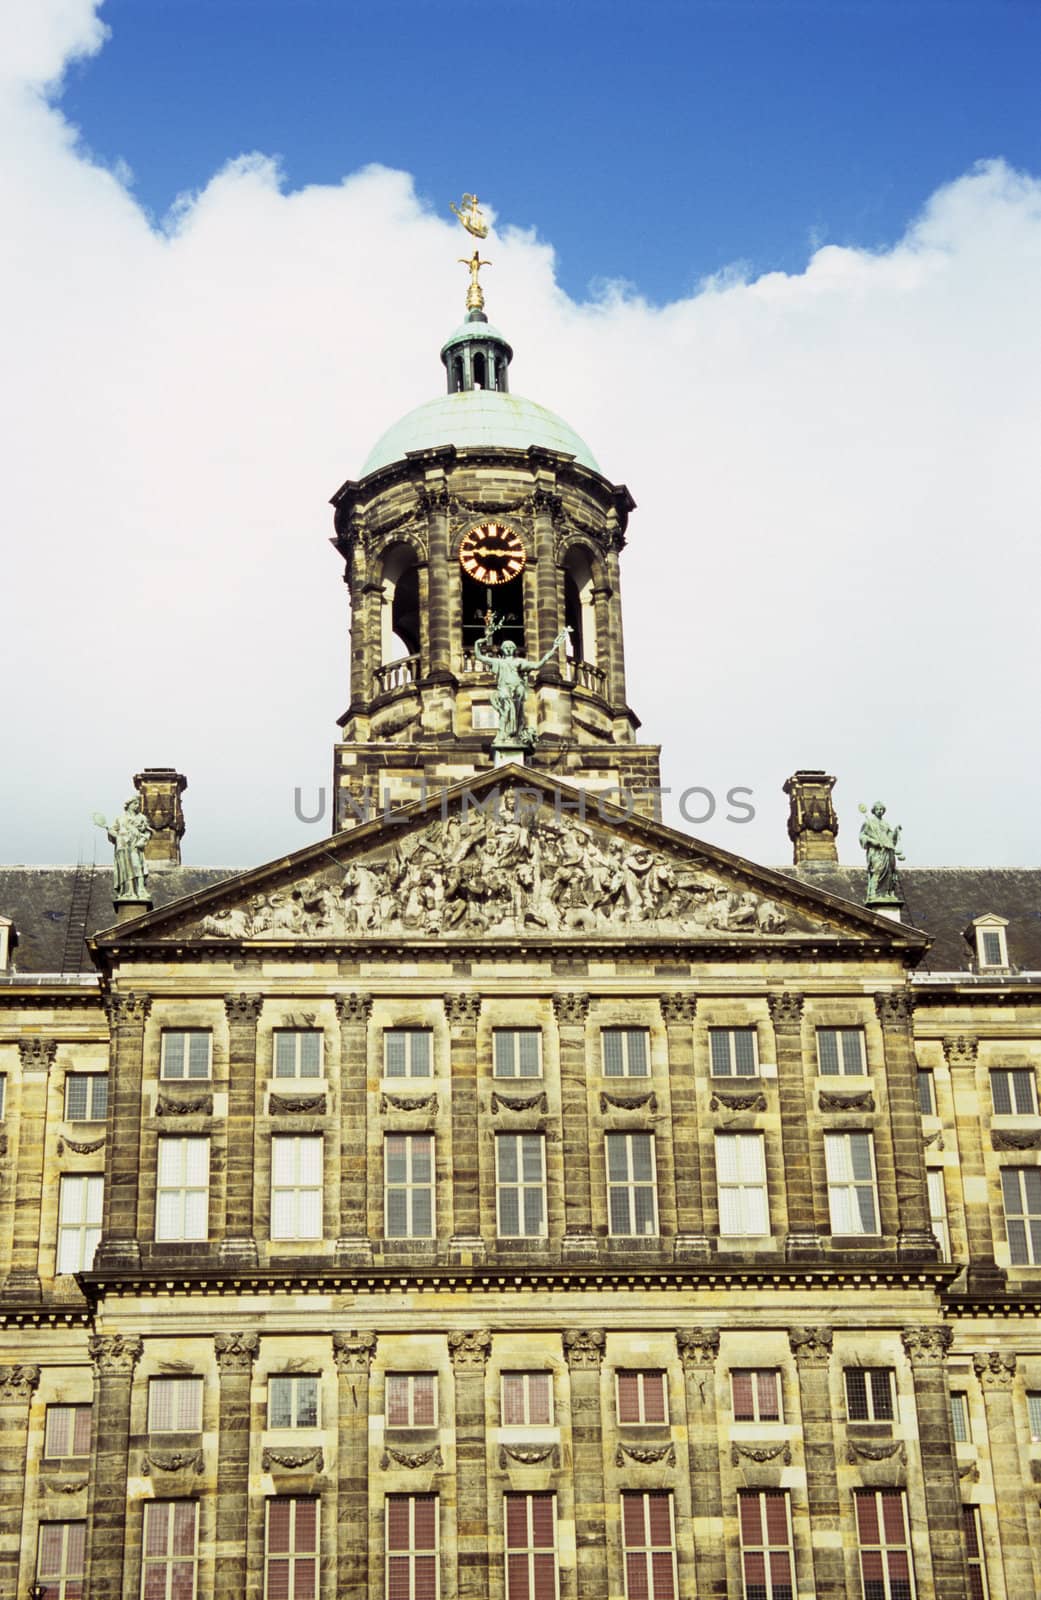 The Amsterdam Royal Palace sits at the head of Dam Square in Amsterdam, the Netherlands.